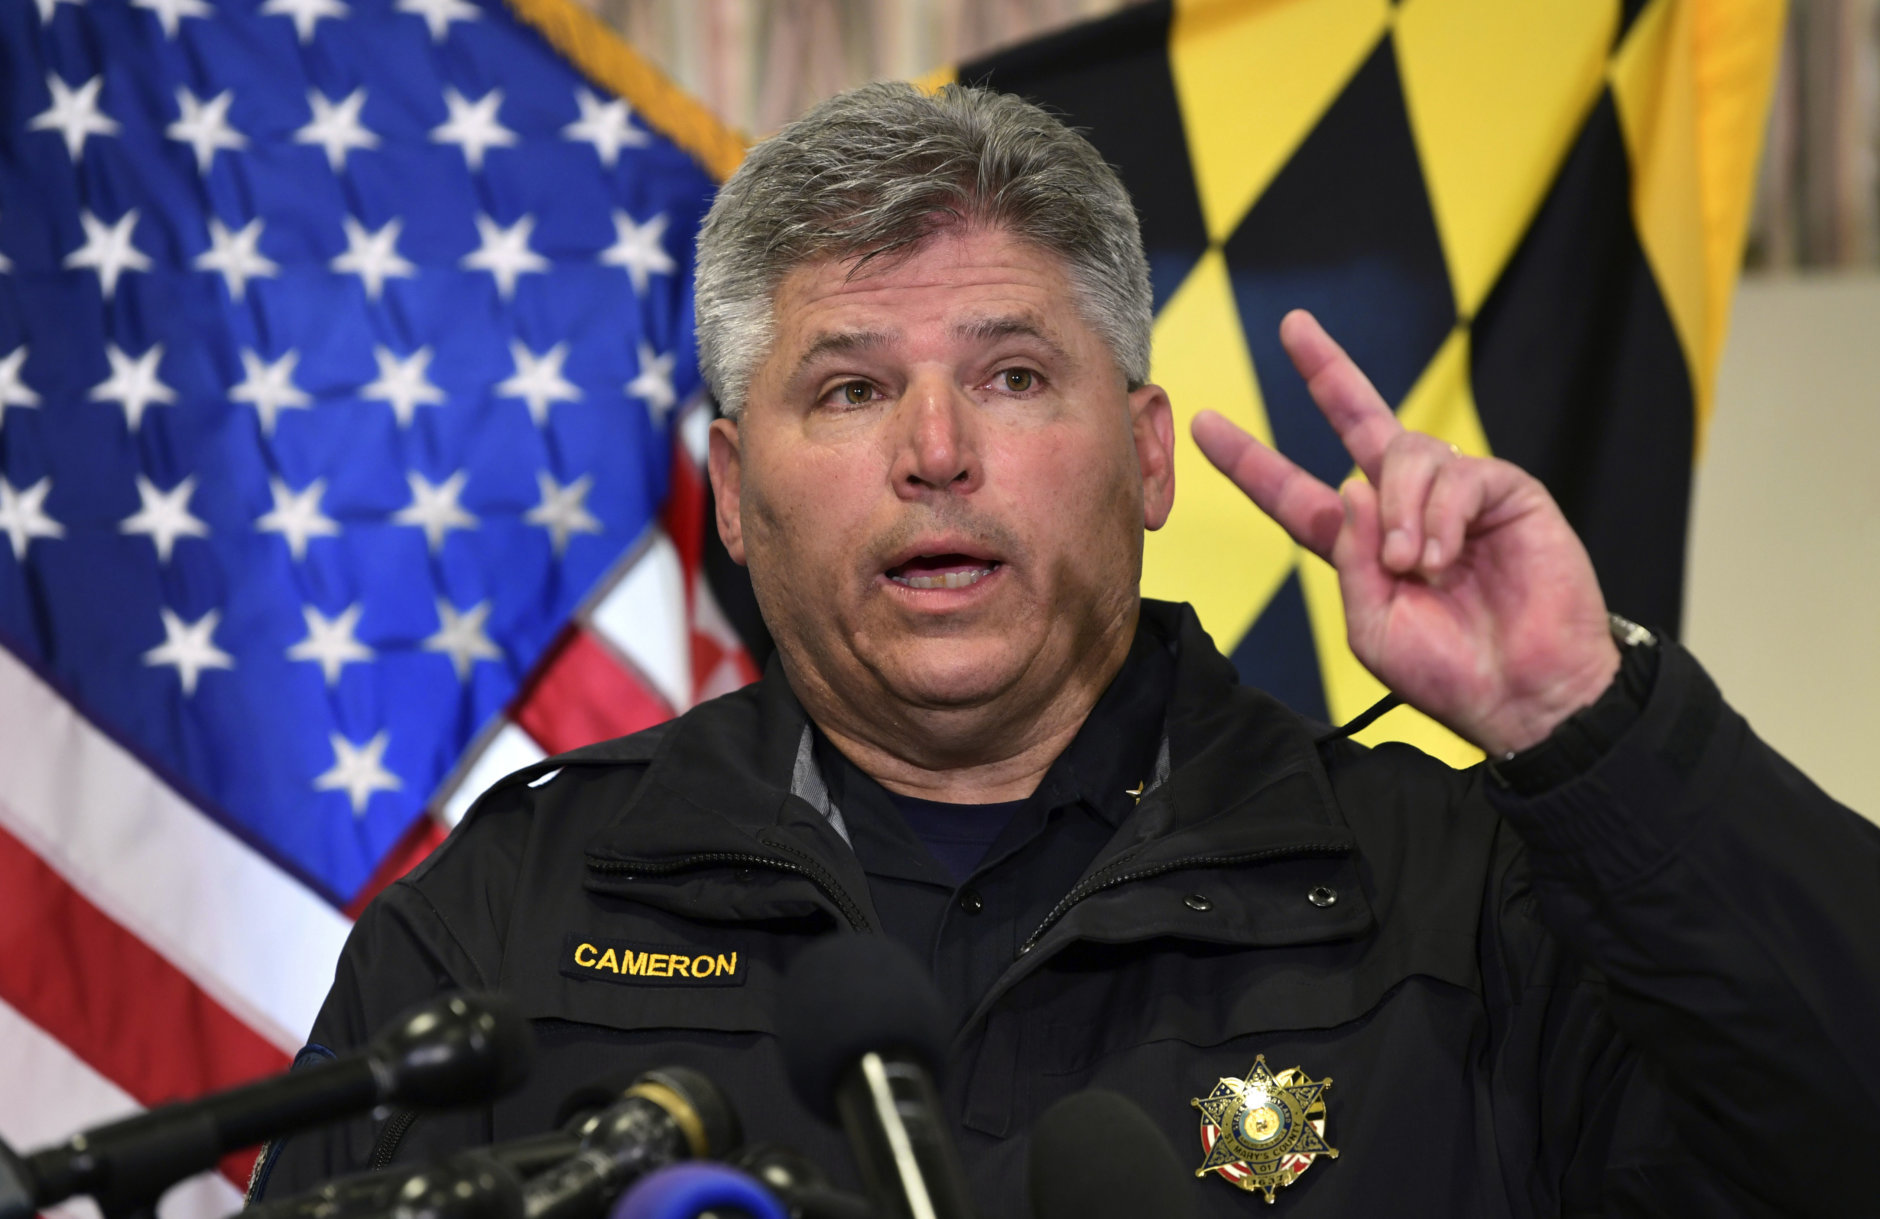 St. Mary's County Sheriff Tim Cameron speaks about the shooting at Great Mills High School during a news conference in Great Mills, Md., Tuesday, March 20, 2018. (AP Photo/Susan Walsh)